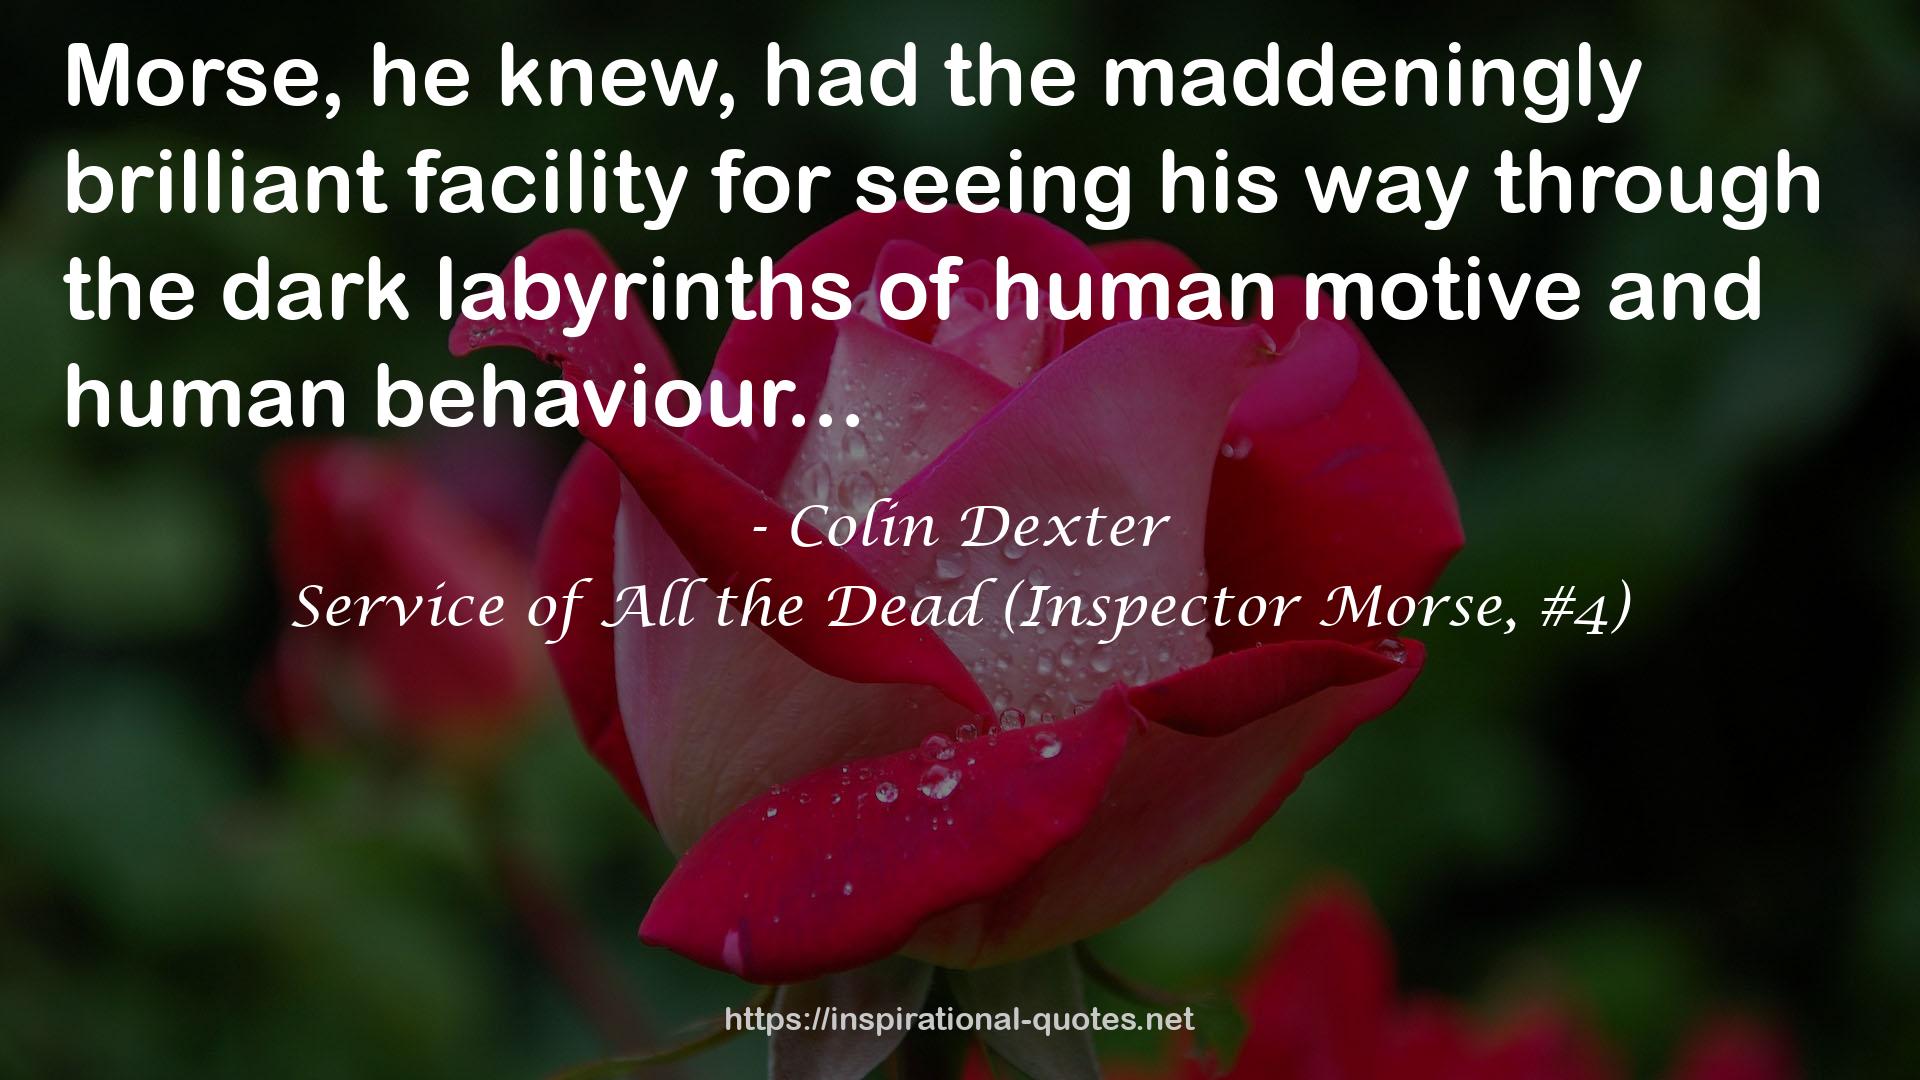 Service of All the Dead (Inspector Morse, #4) QUOTES